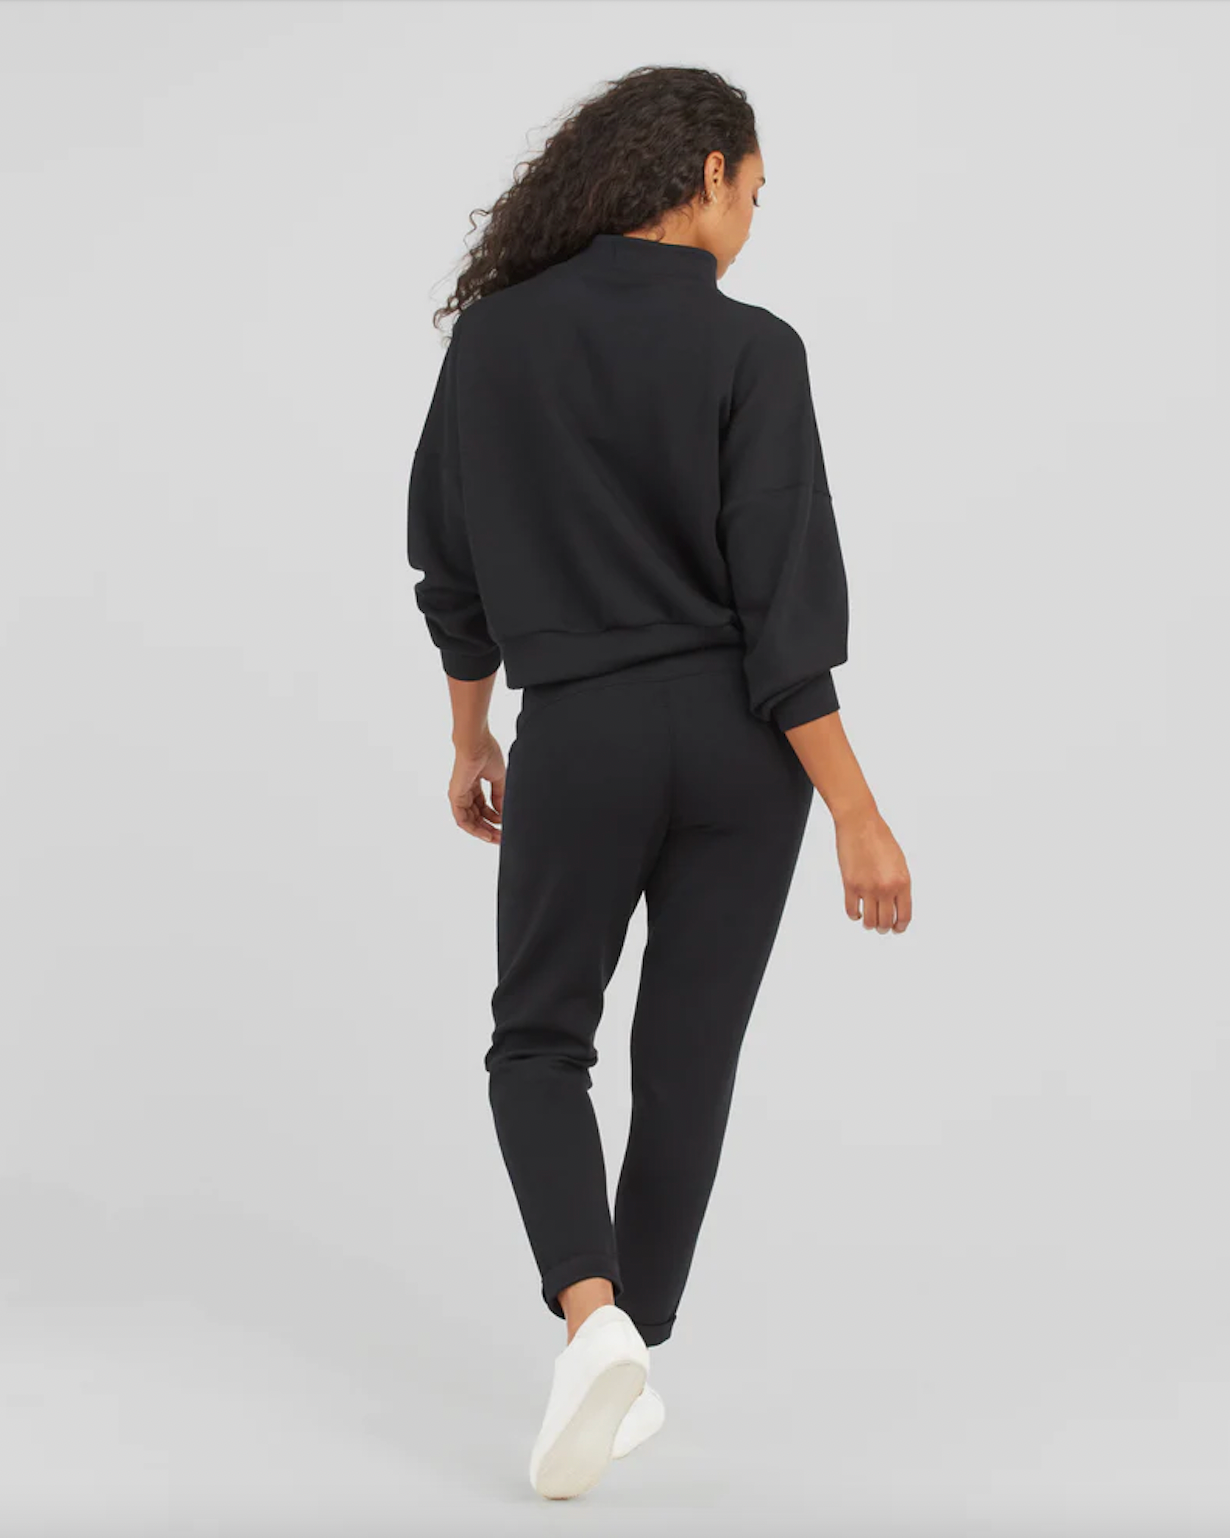 SPANX AIR ESSENTIALS TAPERED IN VERY BLACK | ShopIDB.com - Indigeaux ...